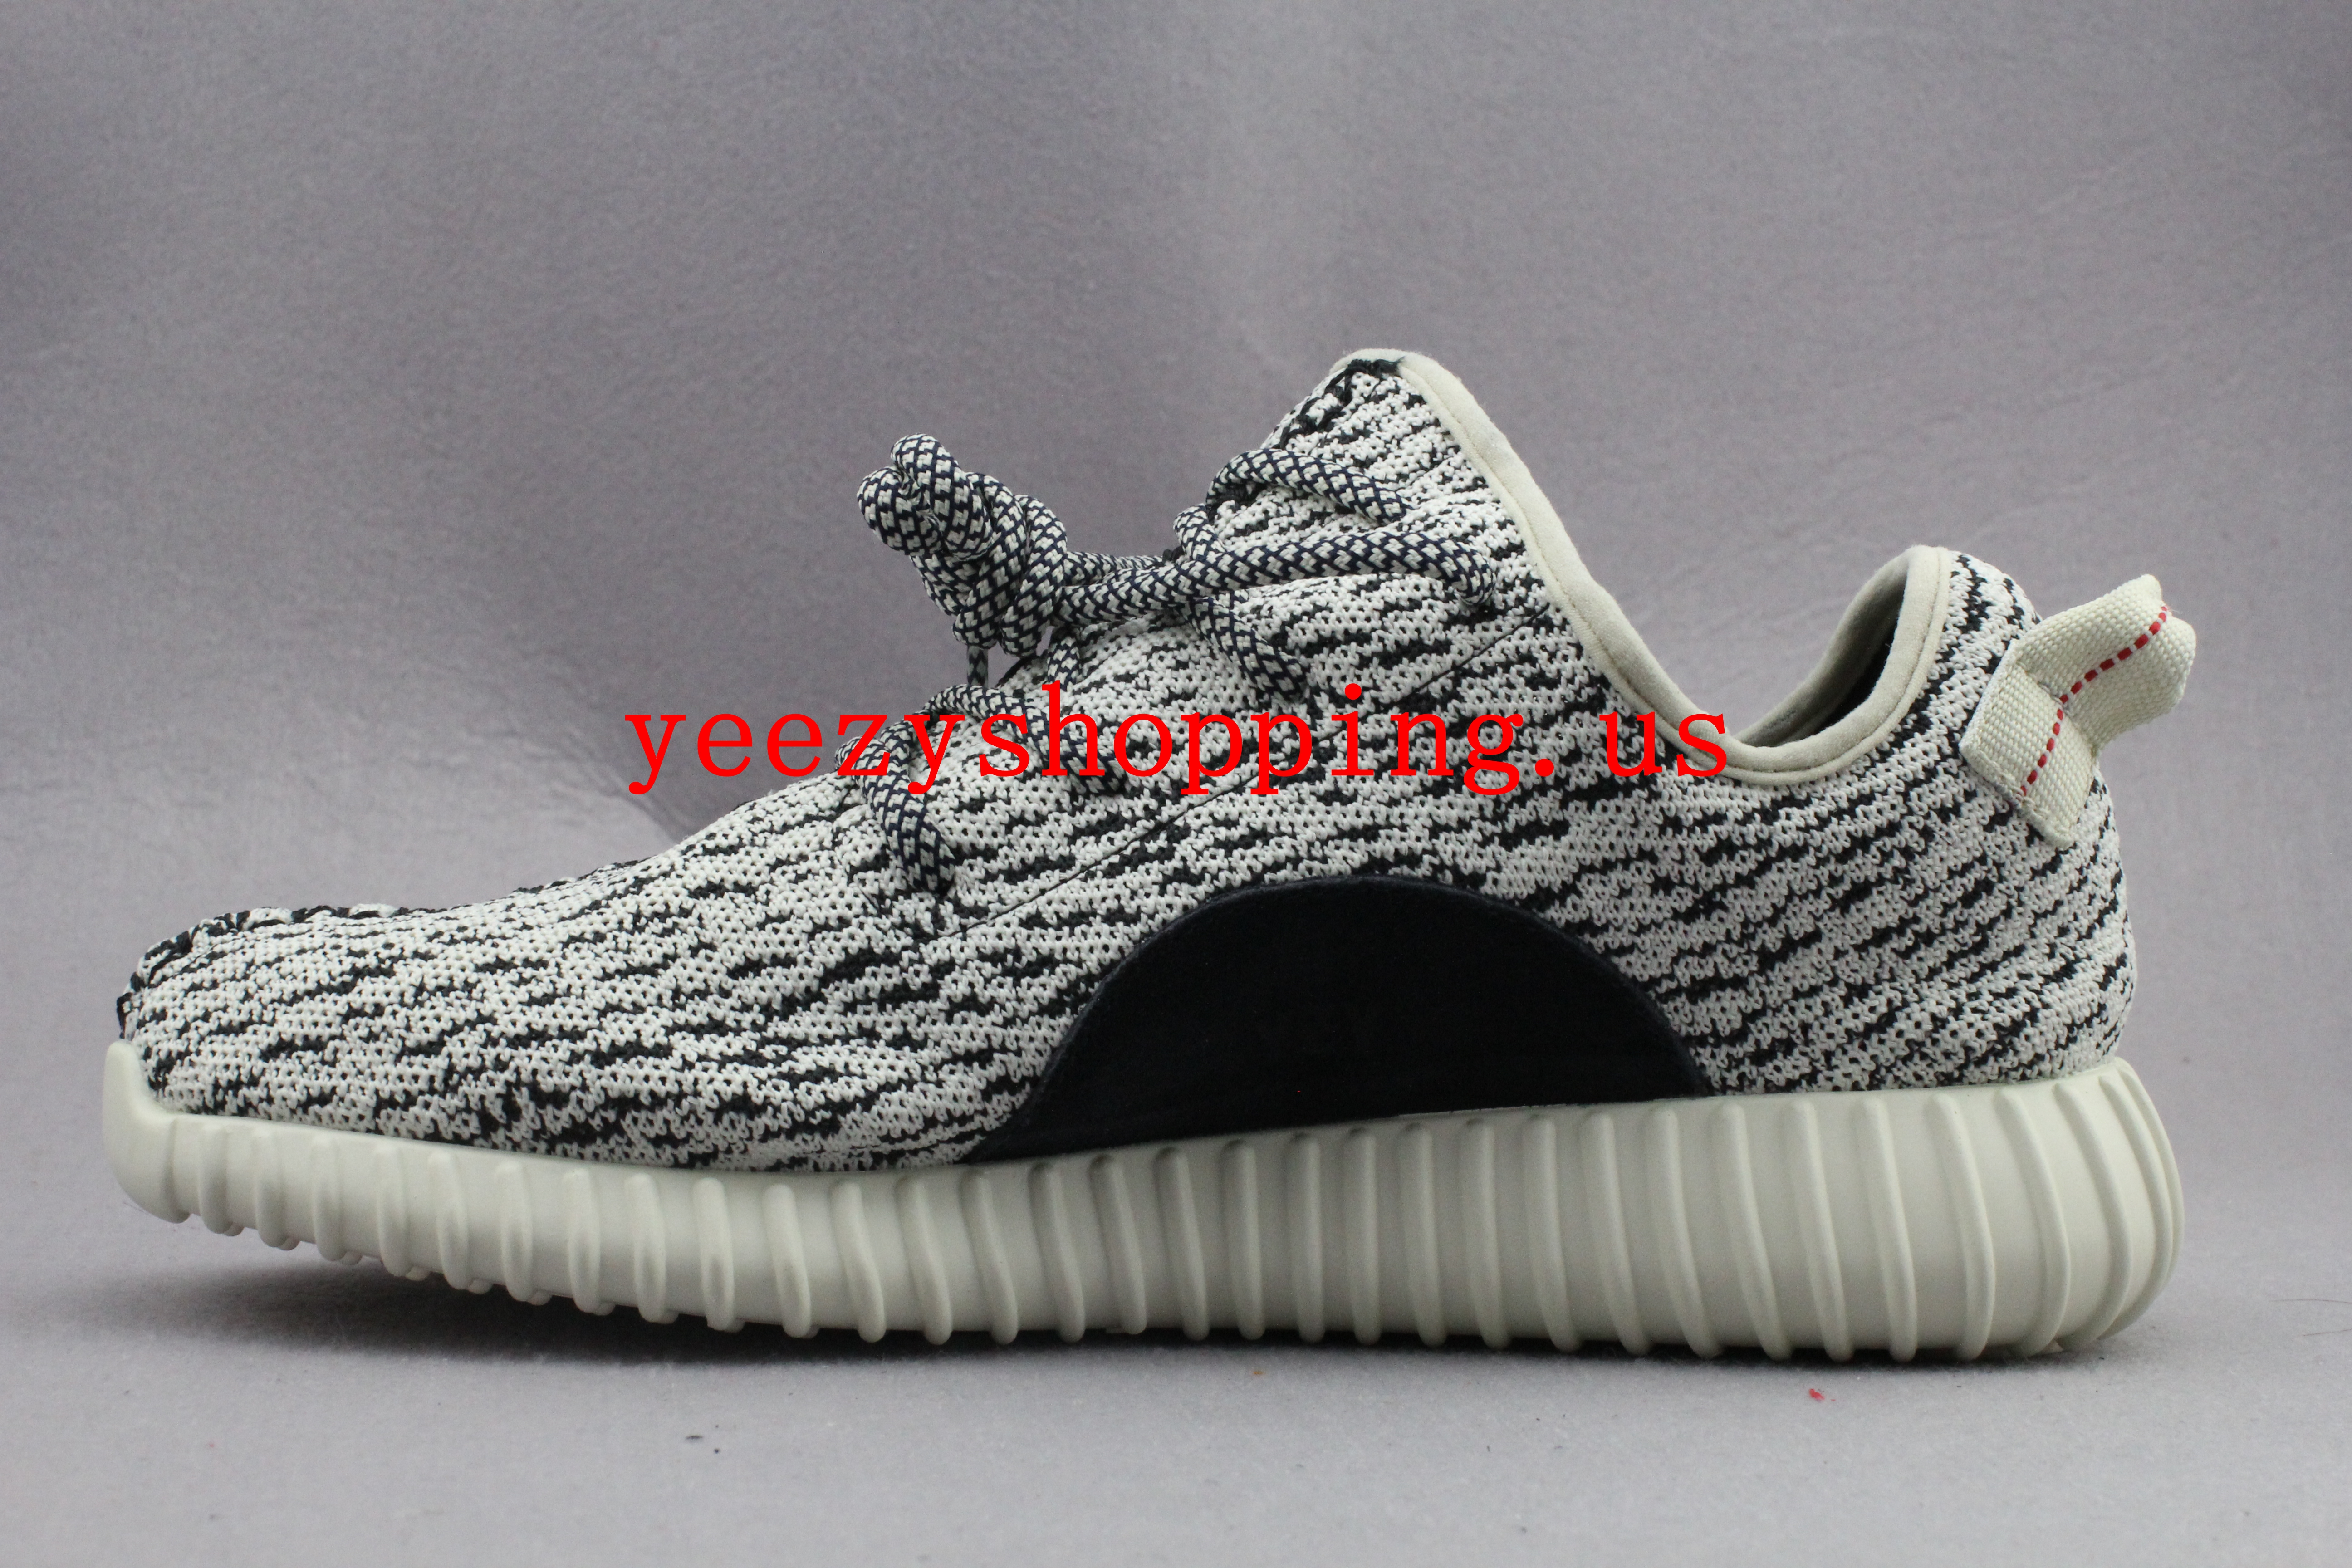 fake yeezy boost shoe | Best Top Quality Yeezy v2 Boost Replica Super Pefect Sneakers